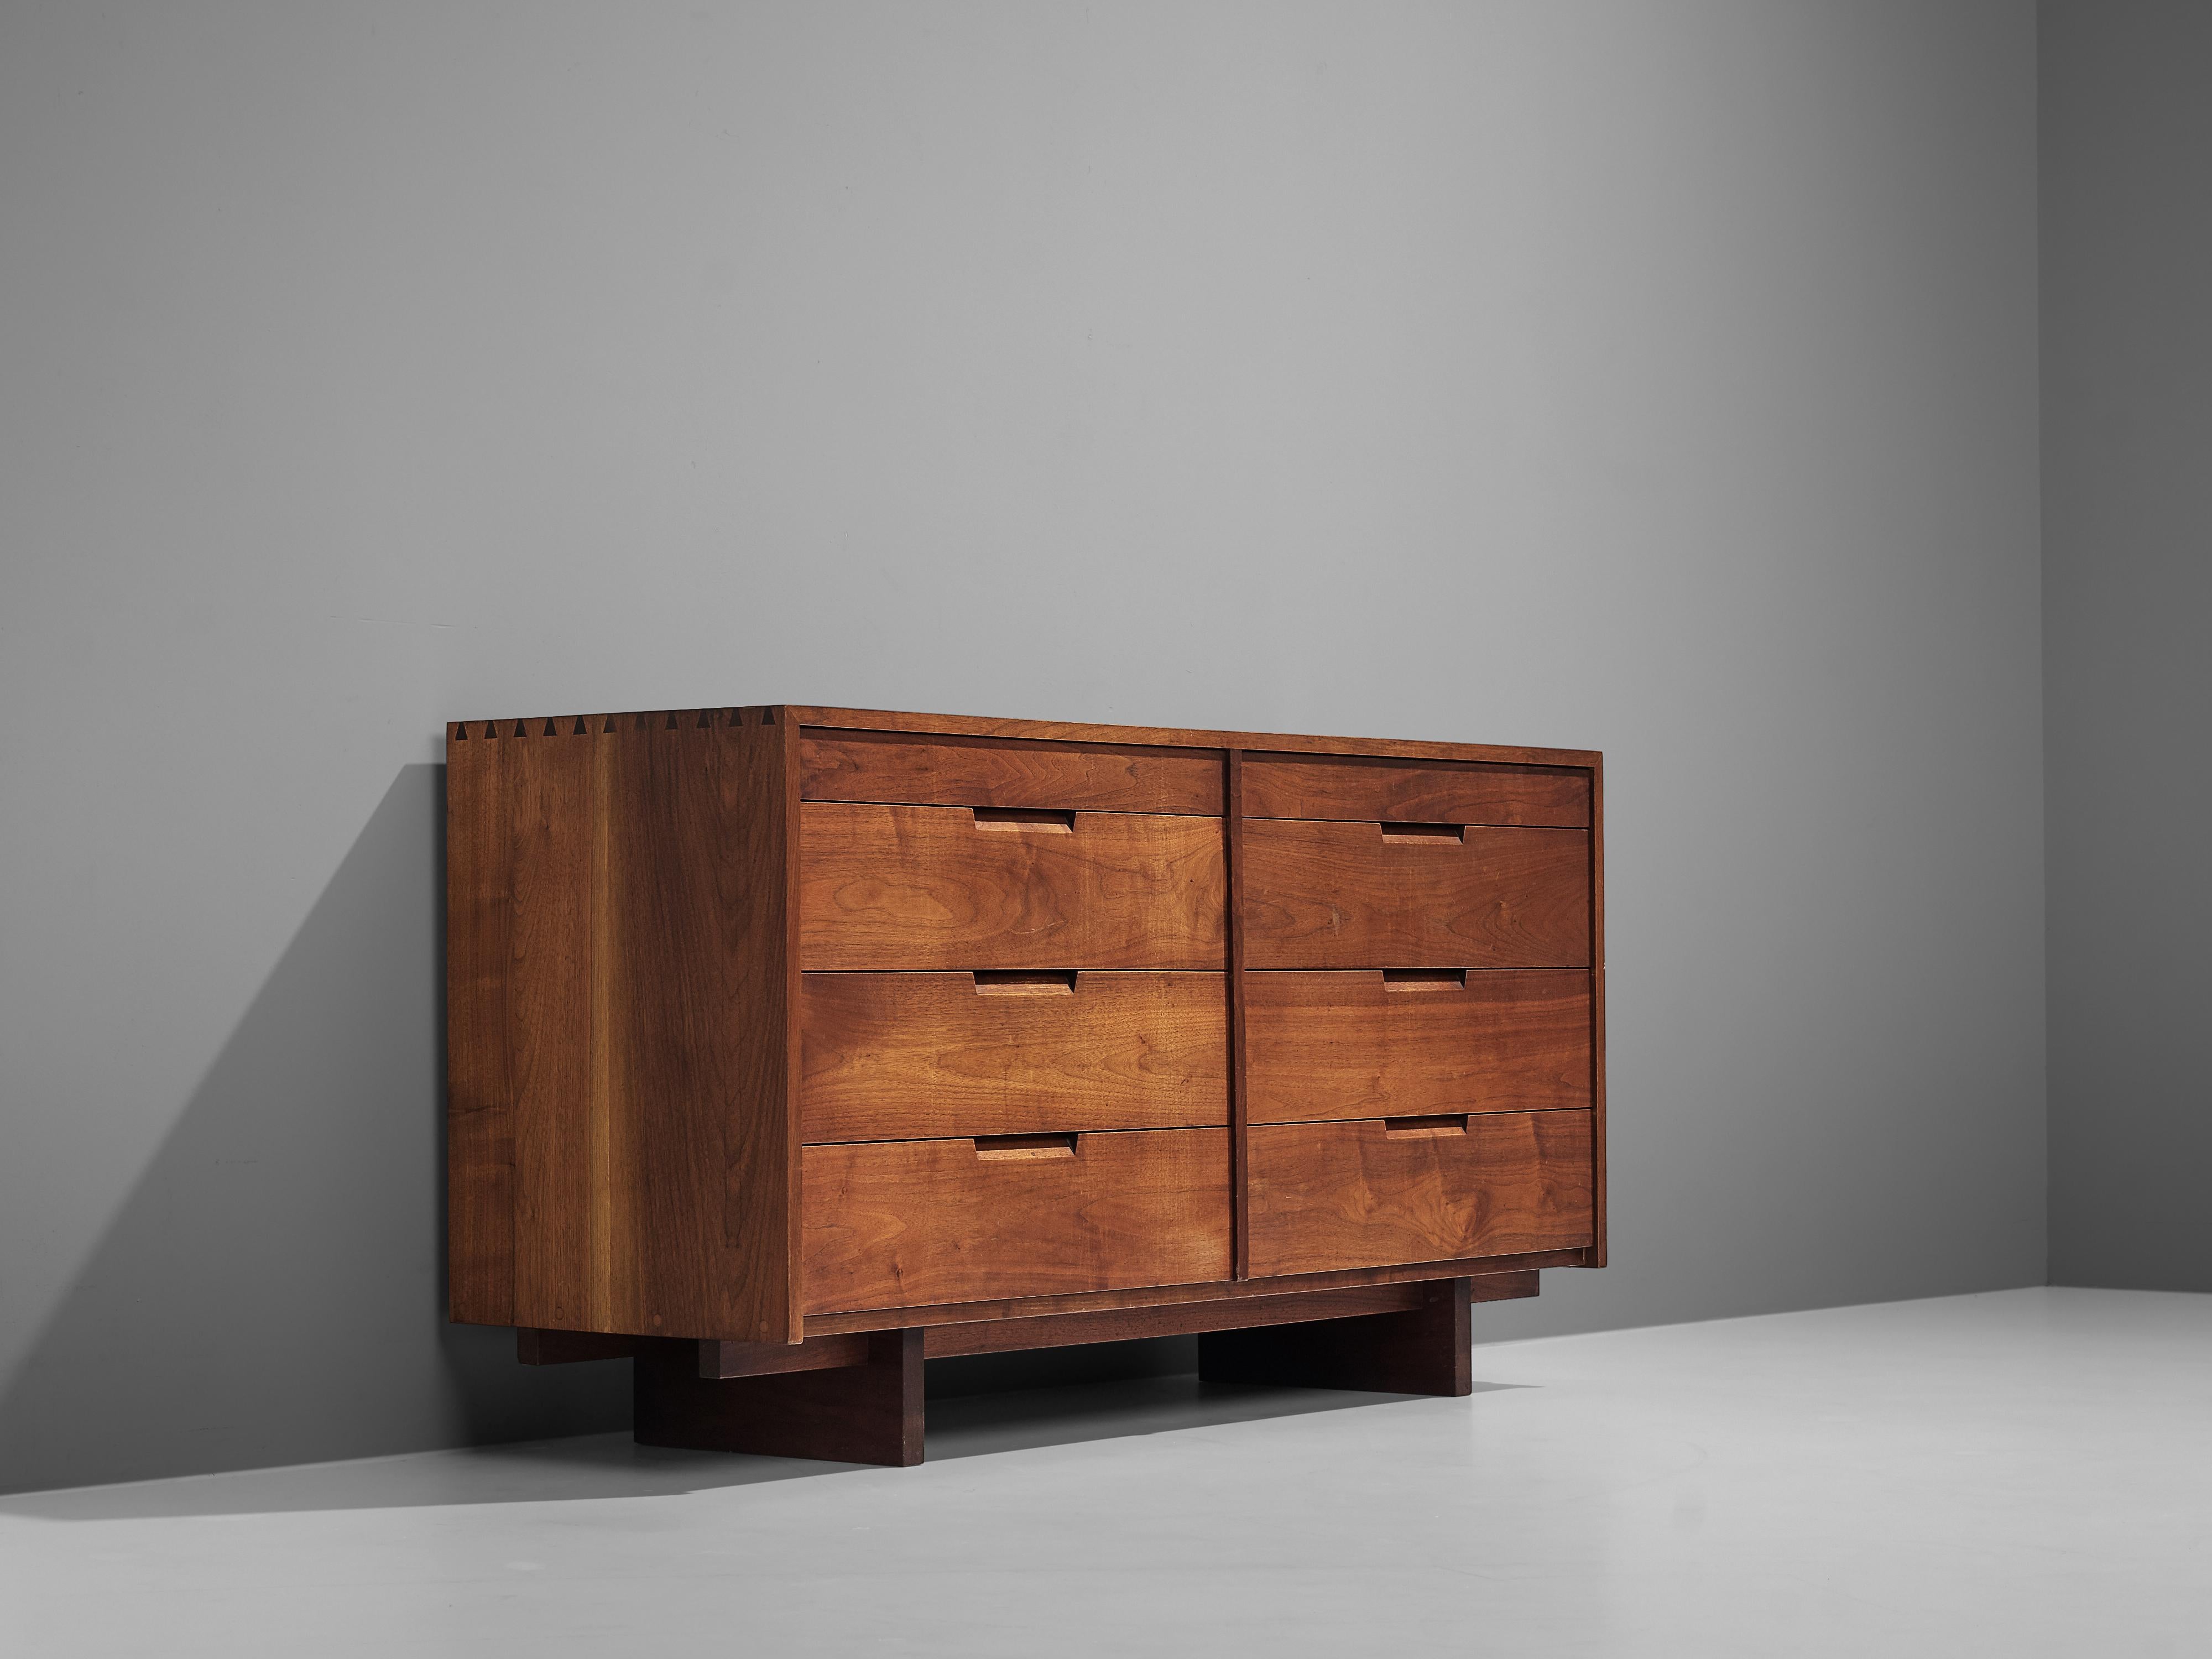 George Nakashima, cabinet, walnut, New Hope, PA, United States, 1955

This sideboard features the characteristics of Nakashima’s works who combines his great knowledge of craftsmanship with grained walnut wood and an eye for proportion. Together